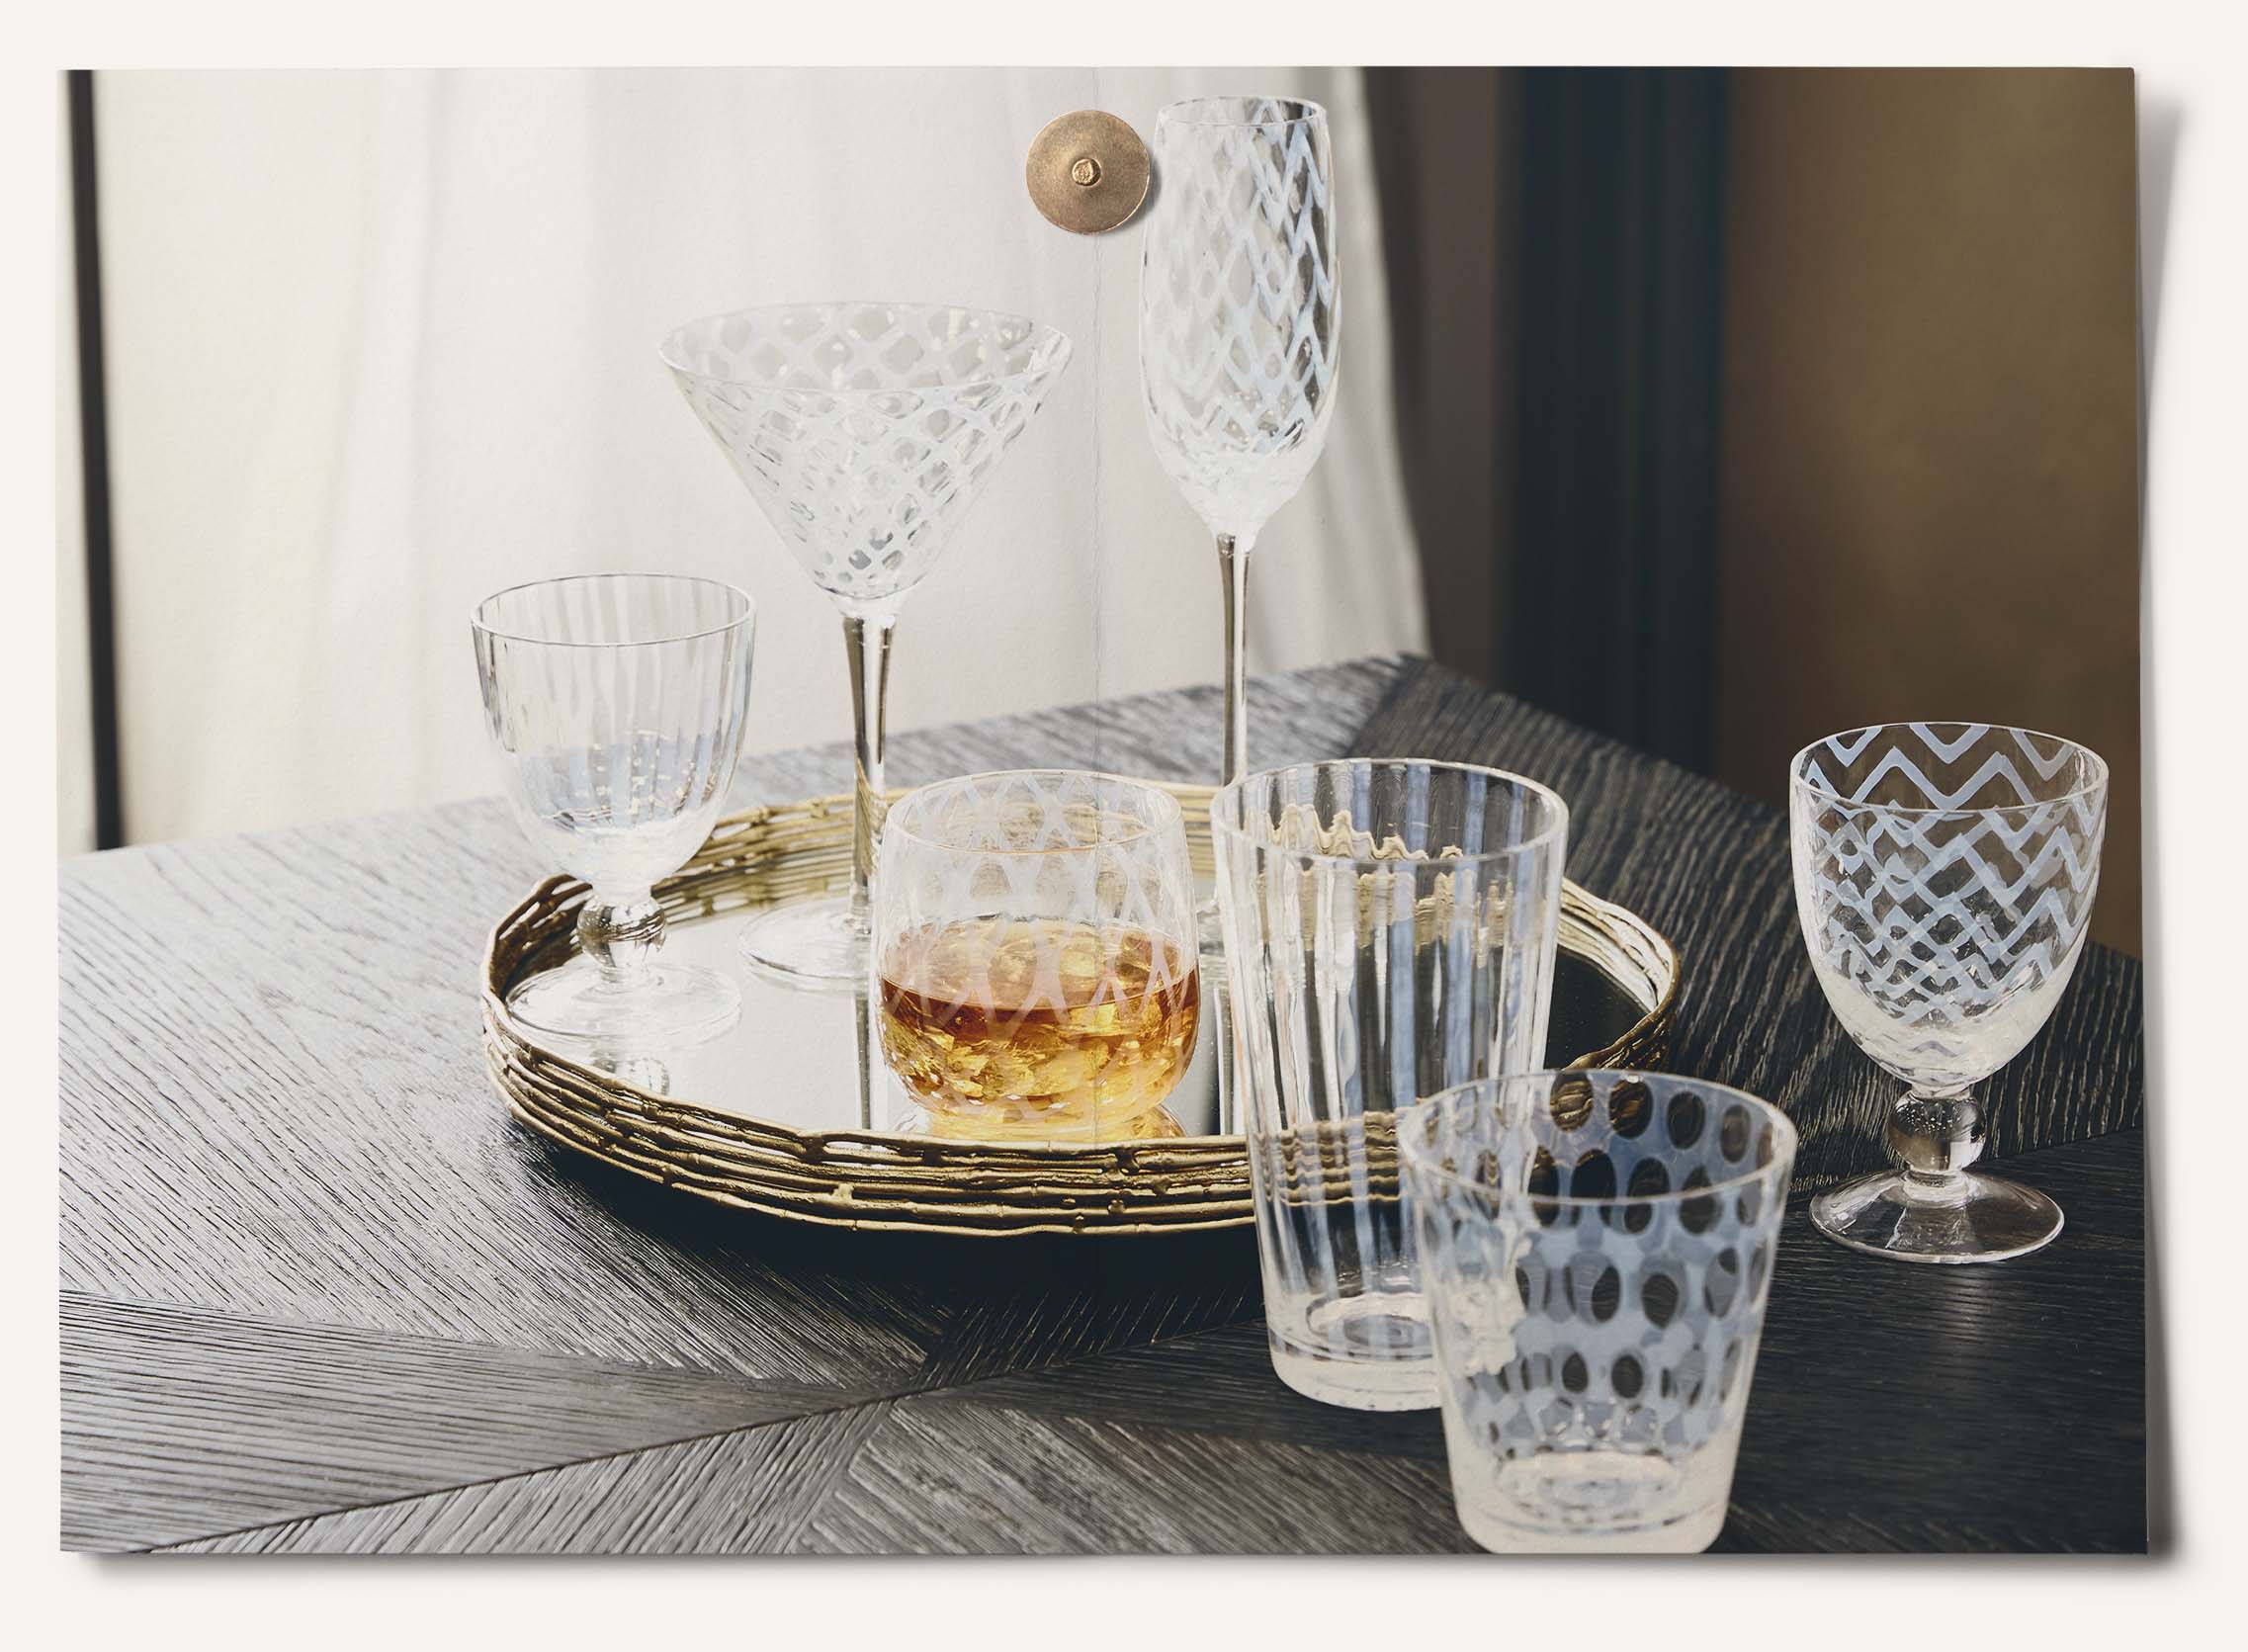 A selection of OKA's Pulcinella glassware, featuring striped, zigzag and polka dot prints, arranged on a mirrored brass tray.